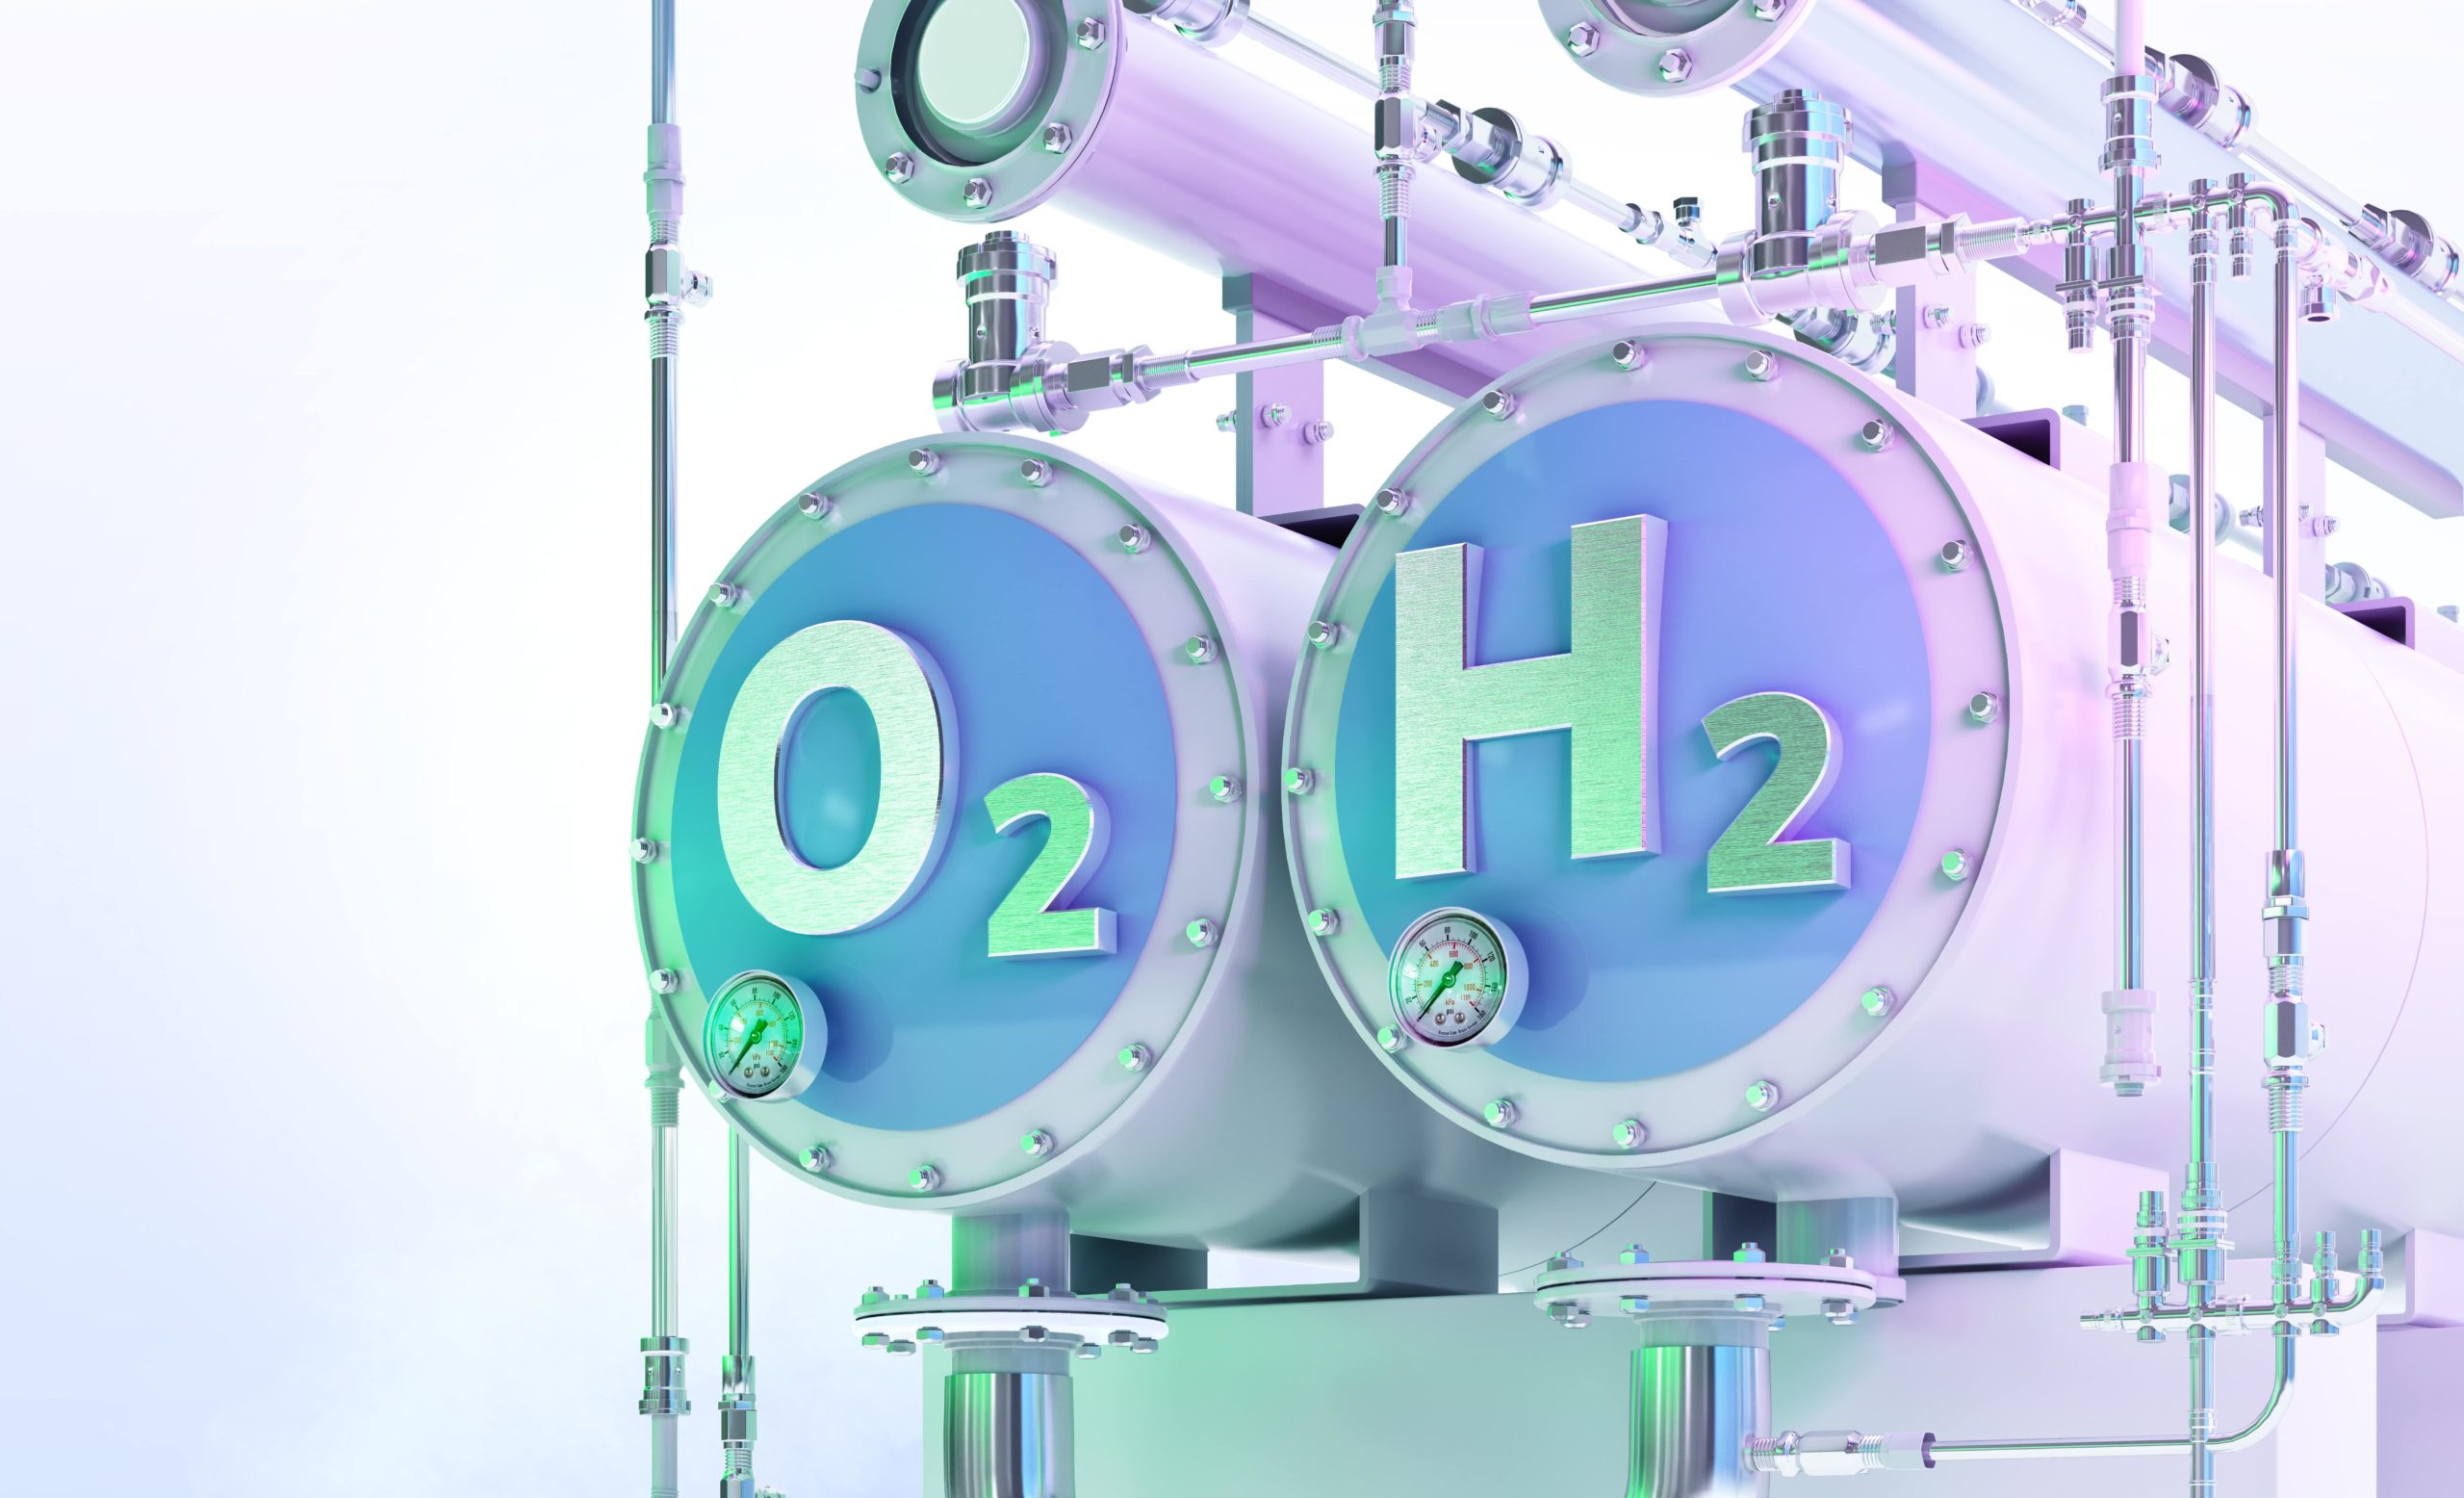 State-Backed Oil Companies Lead the Way on Hydrogen Fuel in India